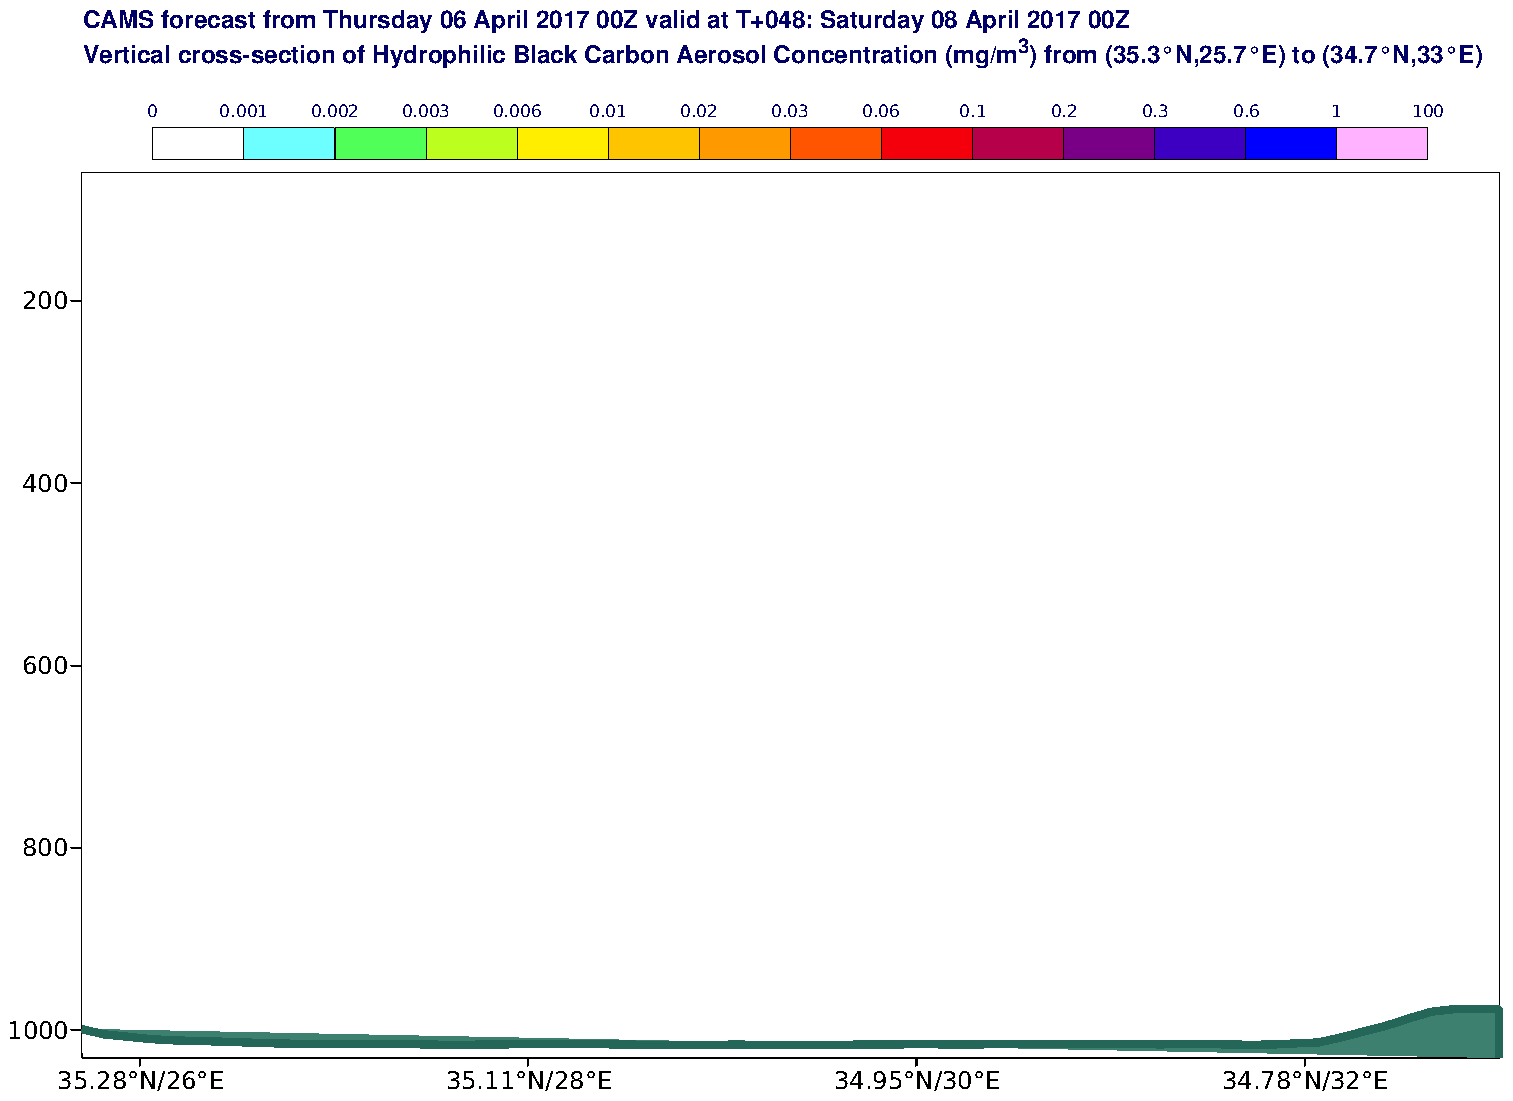 Vertical cross-section of Hydrophilic Black Carbon Aerosol Concentration (mg/m3) valid at T48 - 2017-04-08 00:00